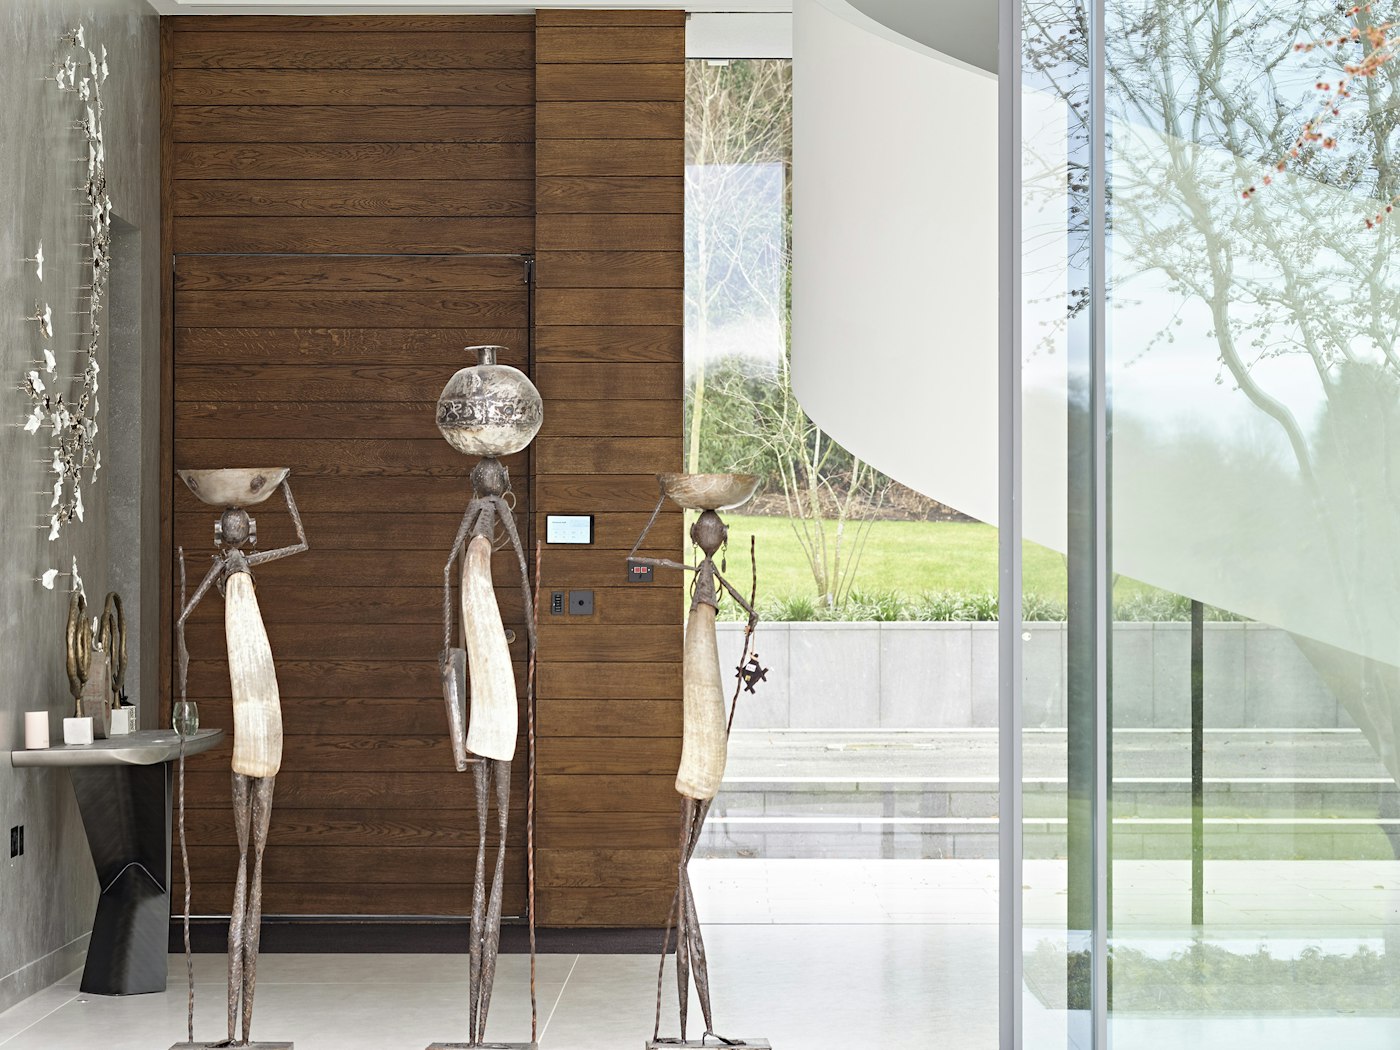 Beautiful sculptures give the finishing touch to this spacious hallway